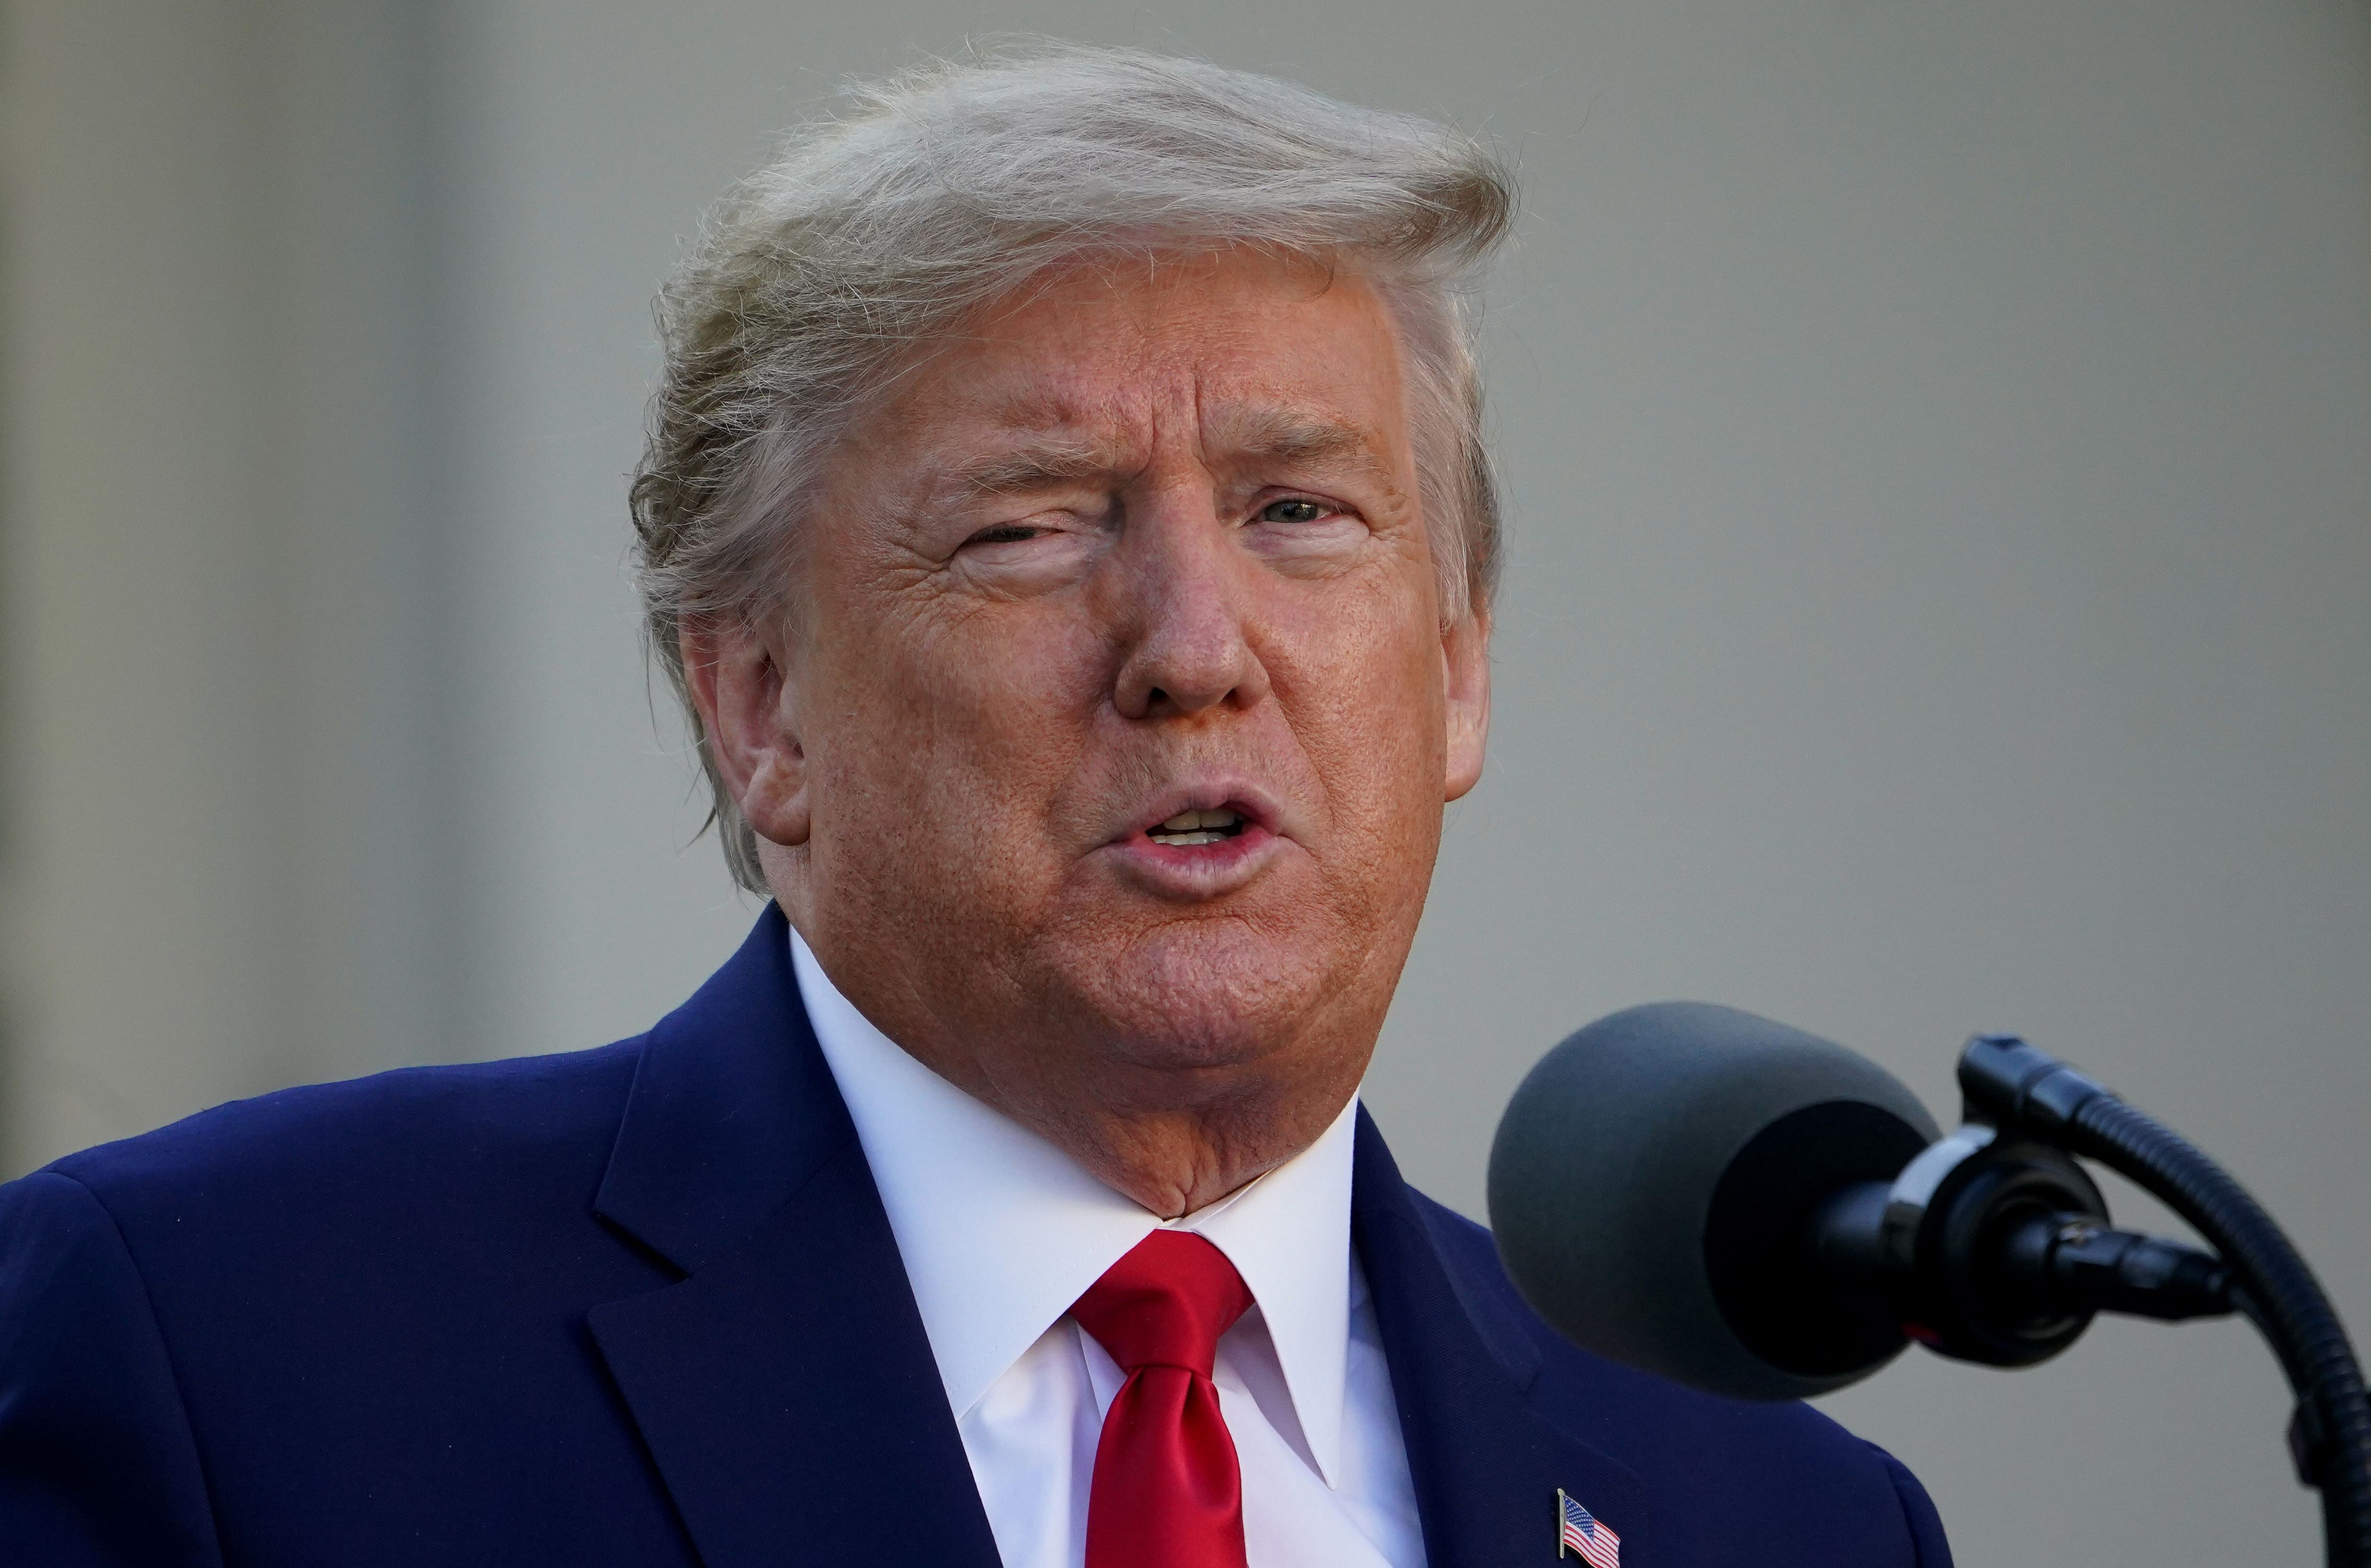 Trump, who is close to Iran's regional rivals Saudi Arabia and Israel, has imposed sweeping unilateral sanctions that include trying to block all of Iran's oil exports as he seeks to reduce Tehran's regional activities. (AFP)